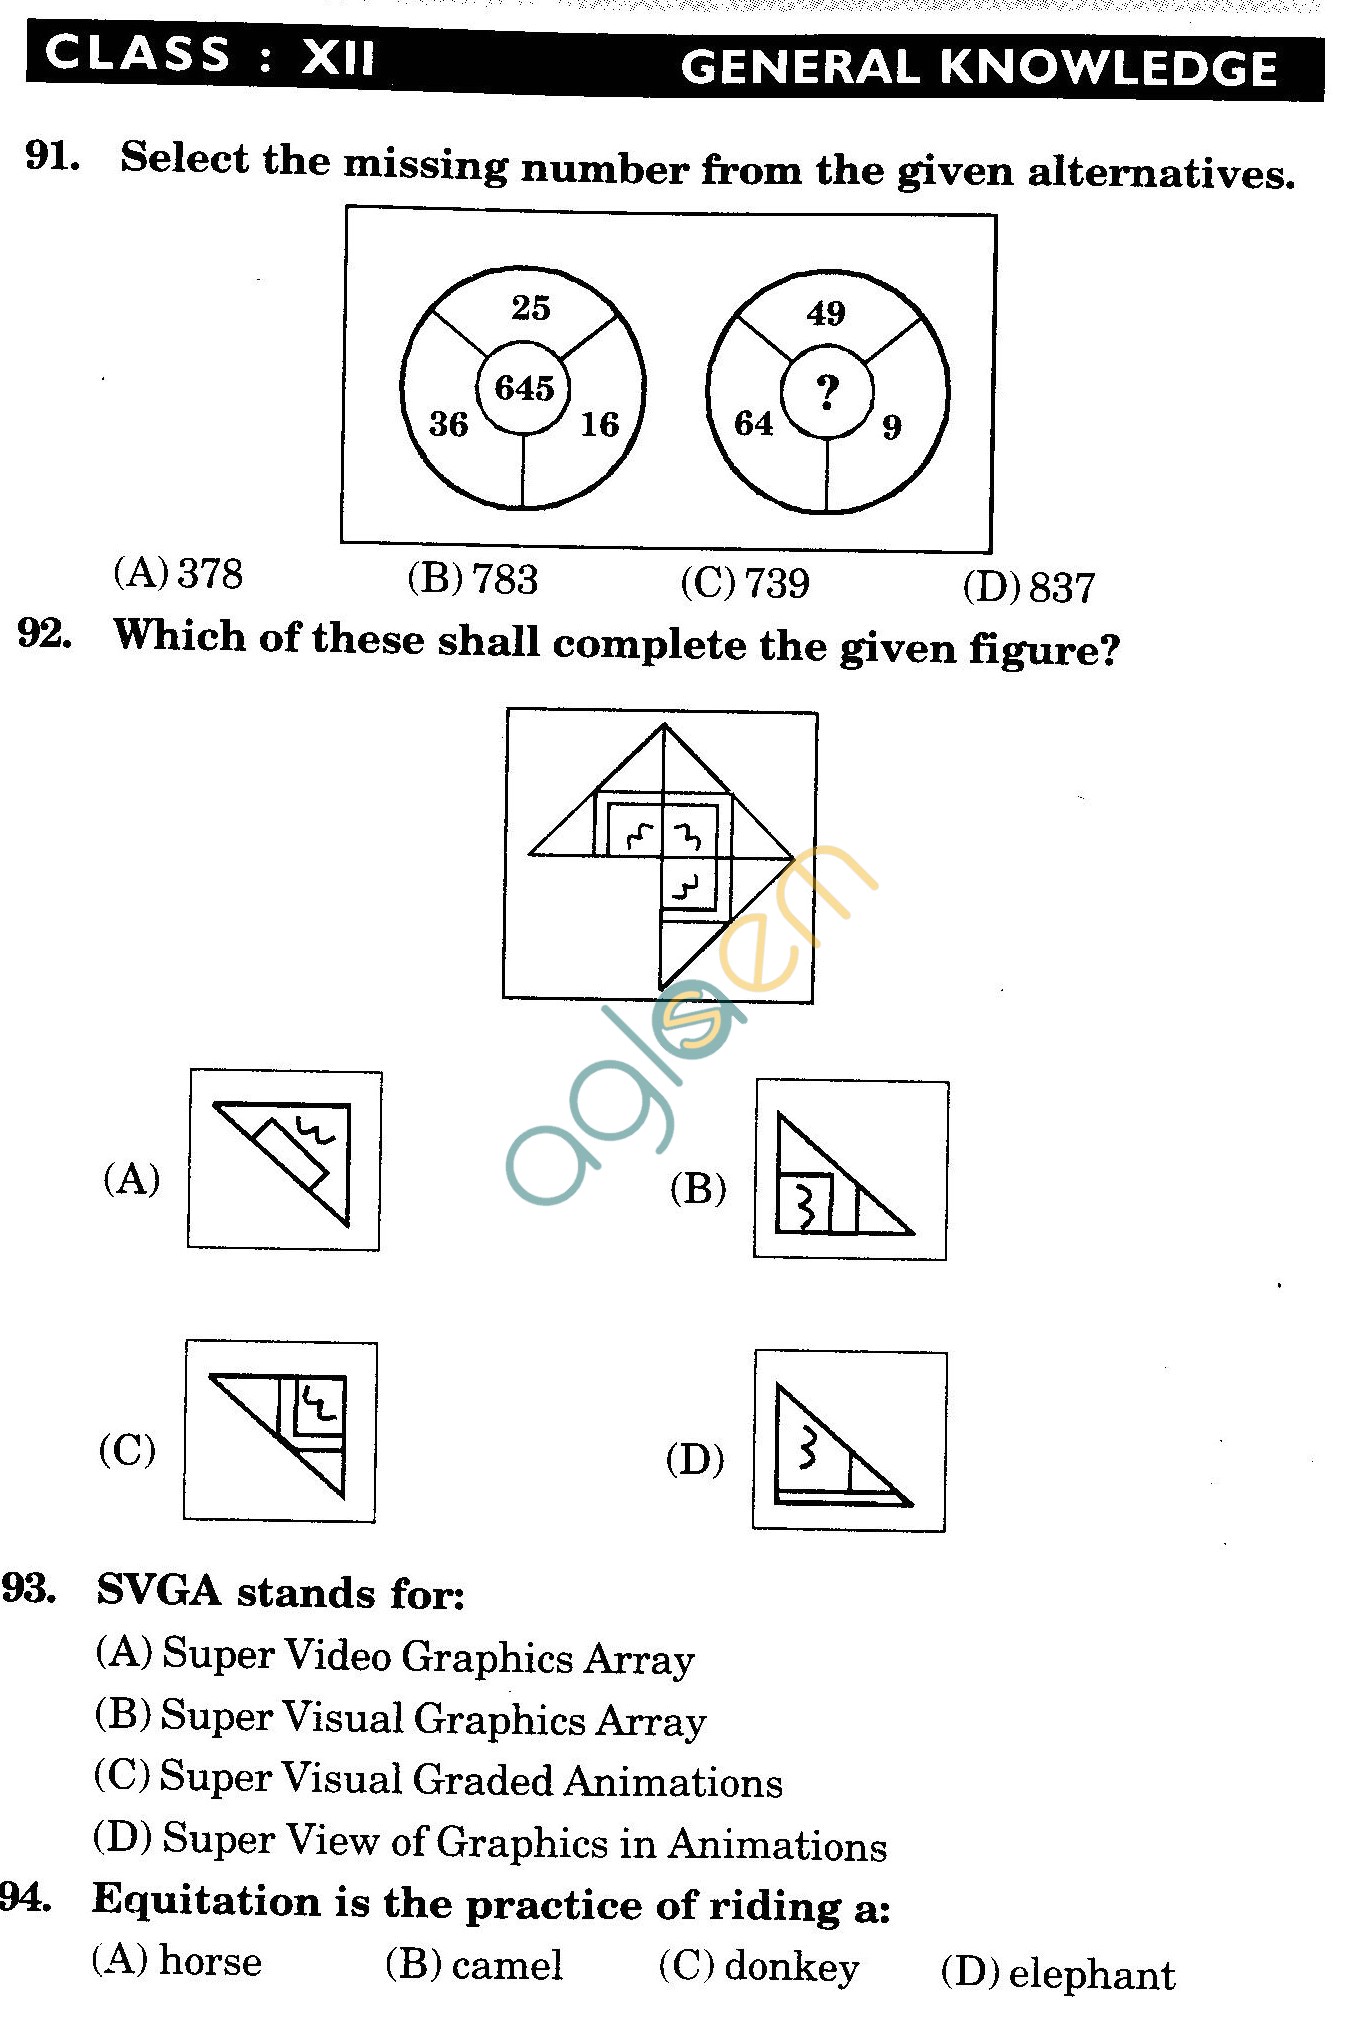 NSTSE 2009 Class XII PCB Question Paper with Answers - General Knowledge